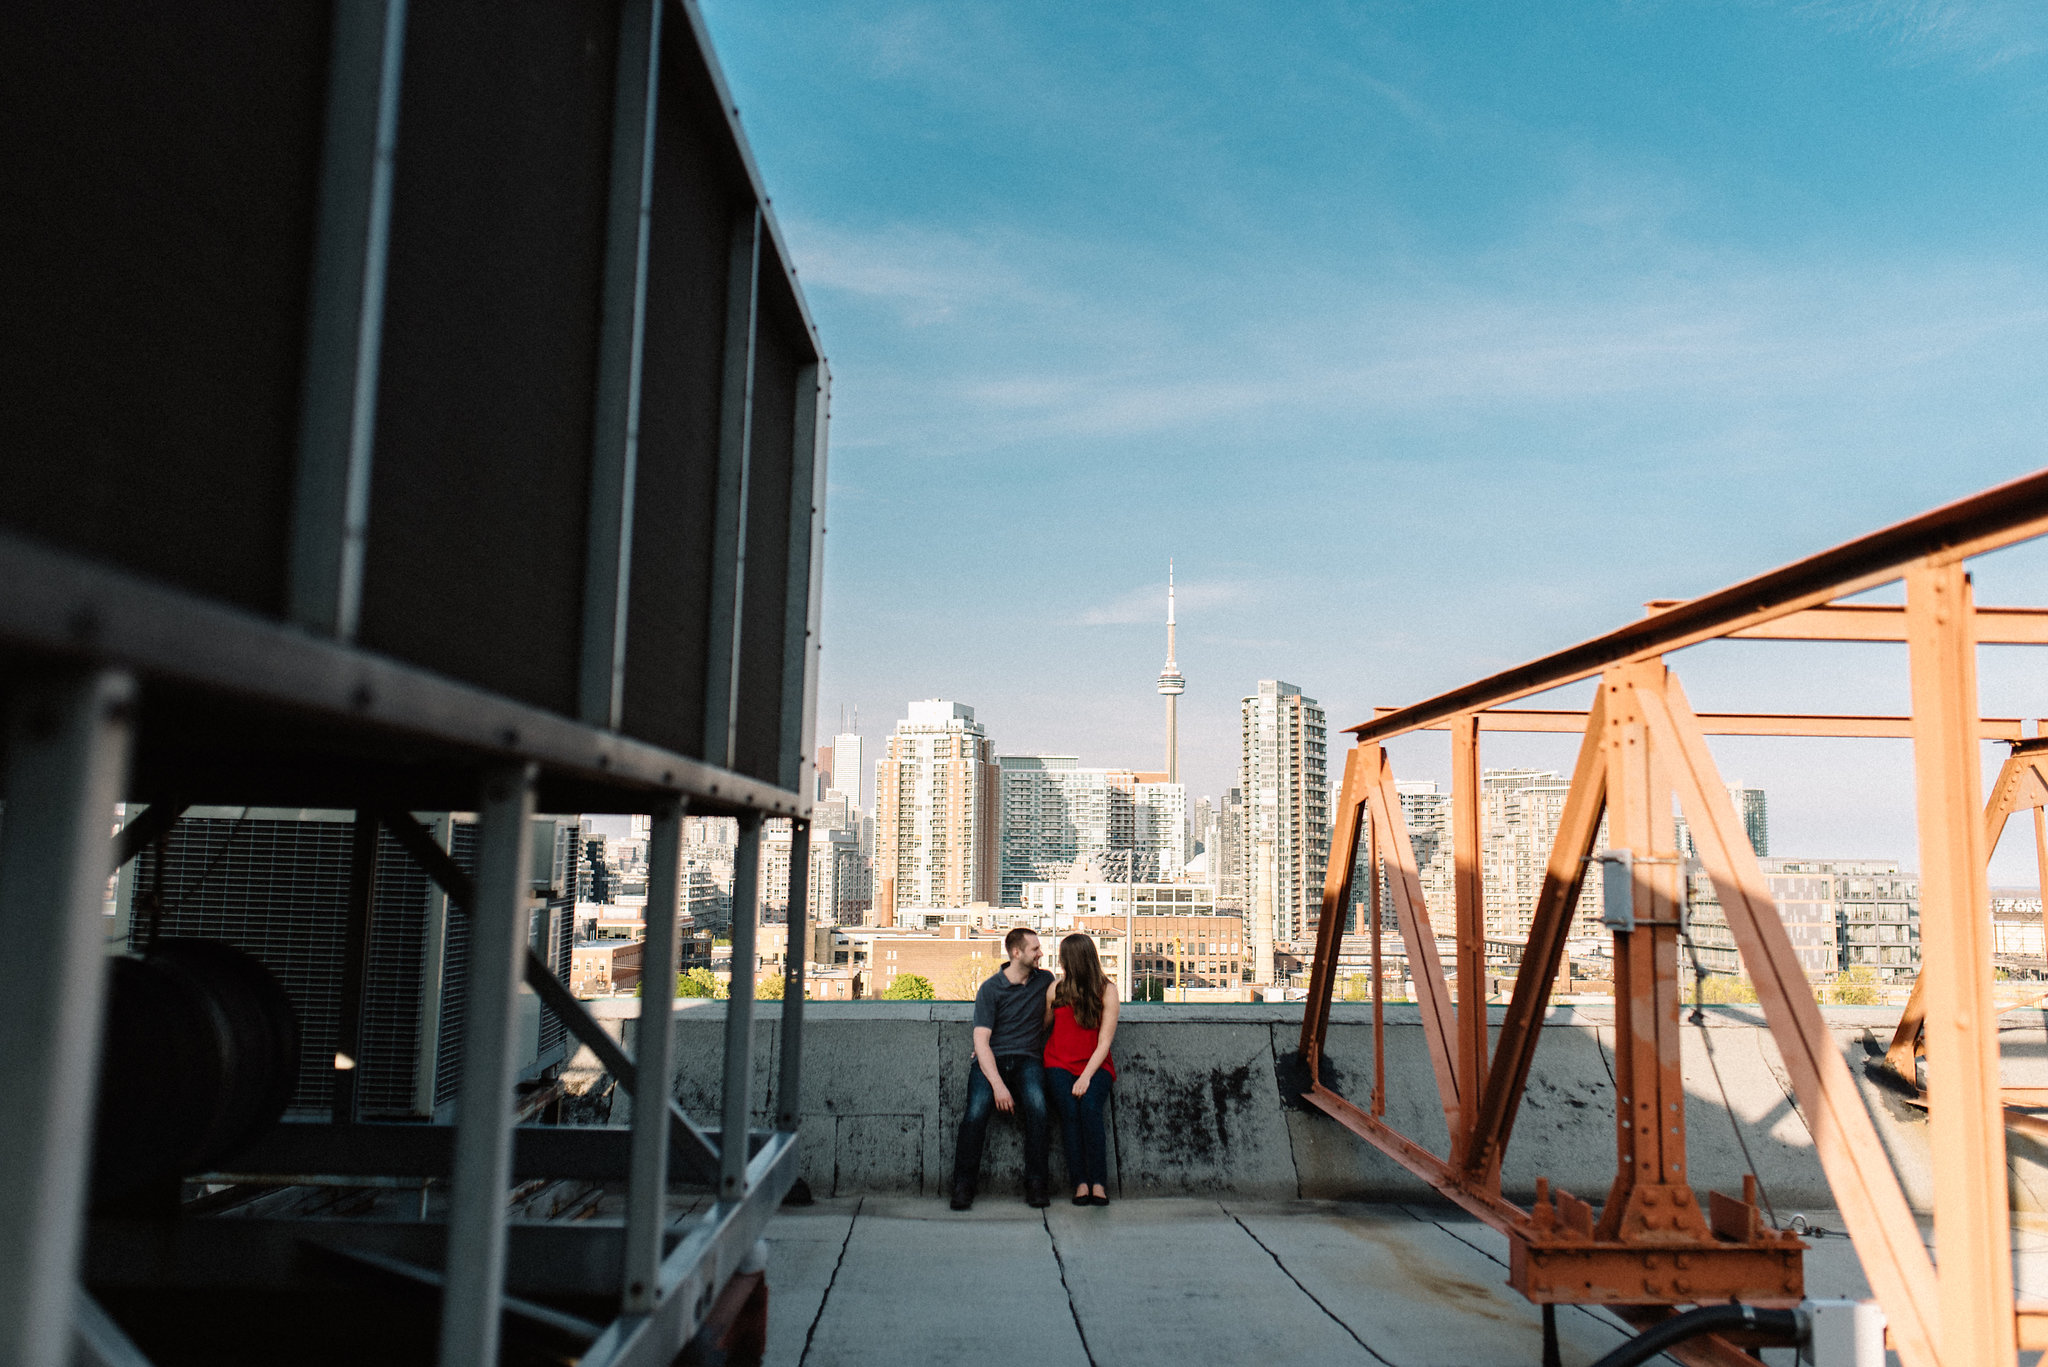 Rooftop engagement photos - Olive Photography Toronto